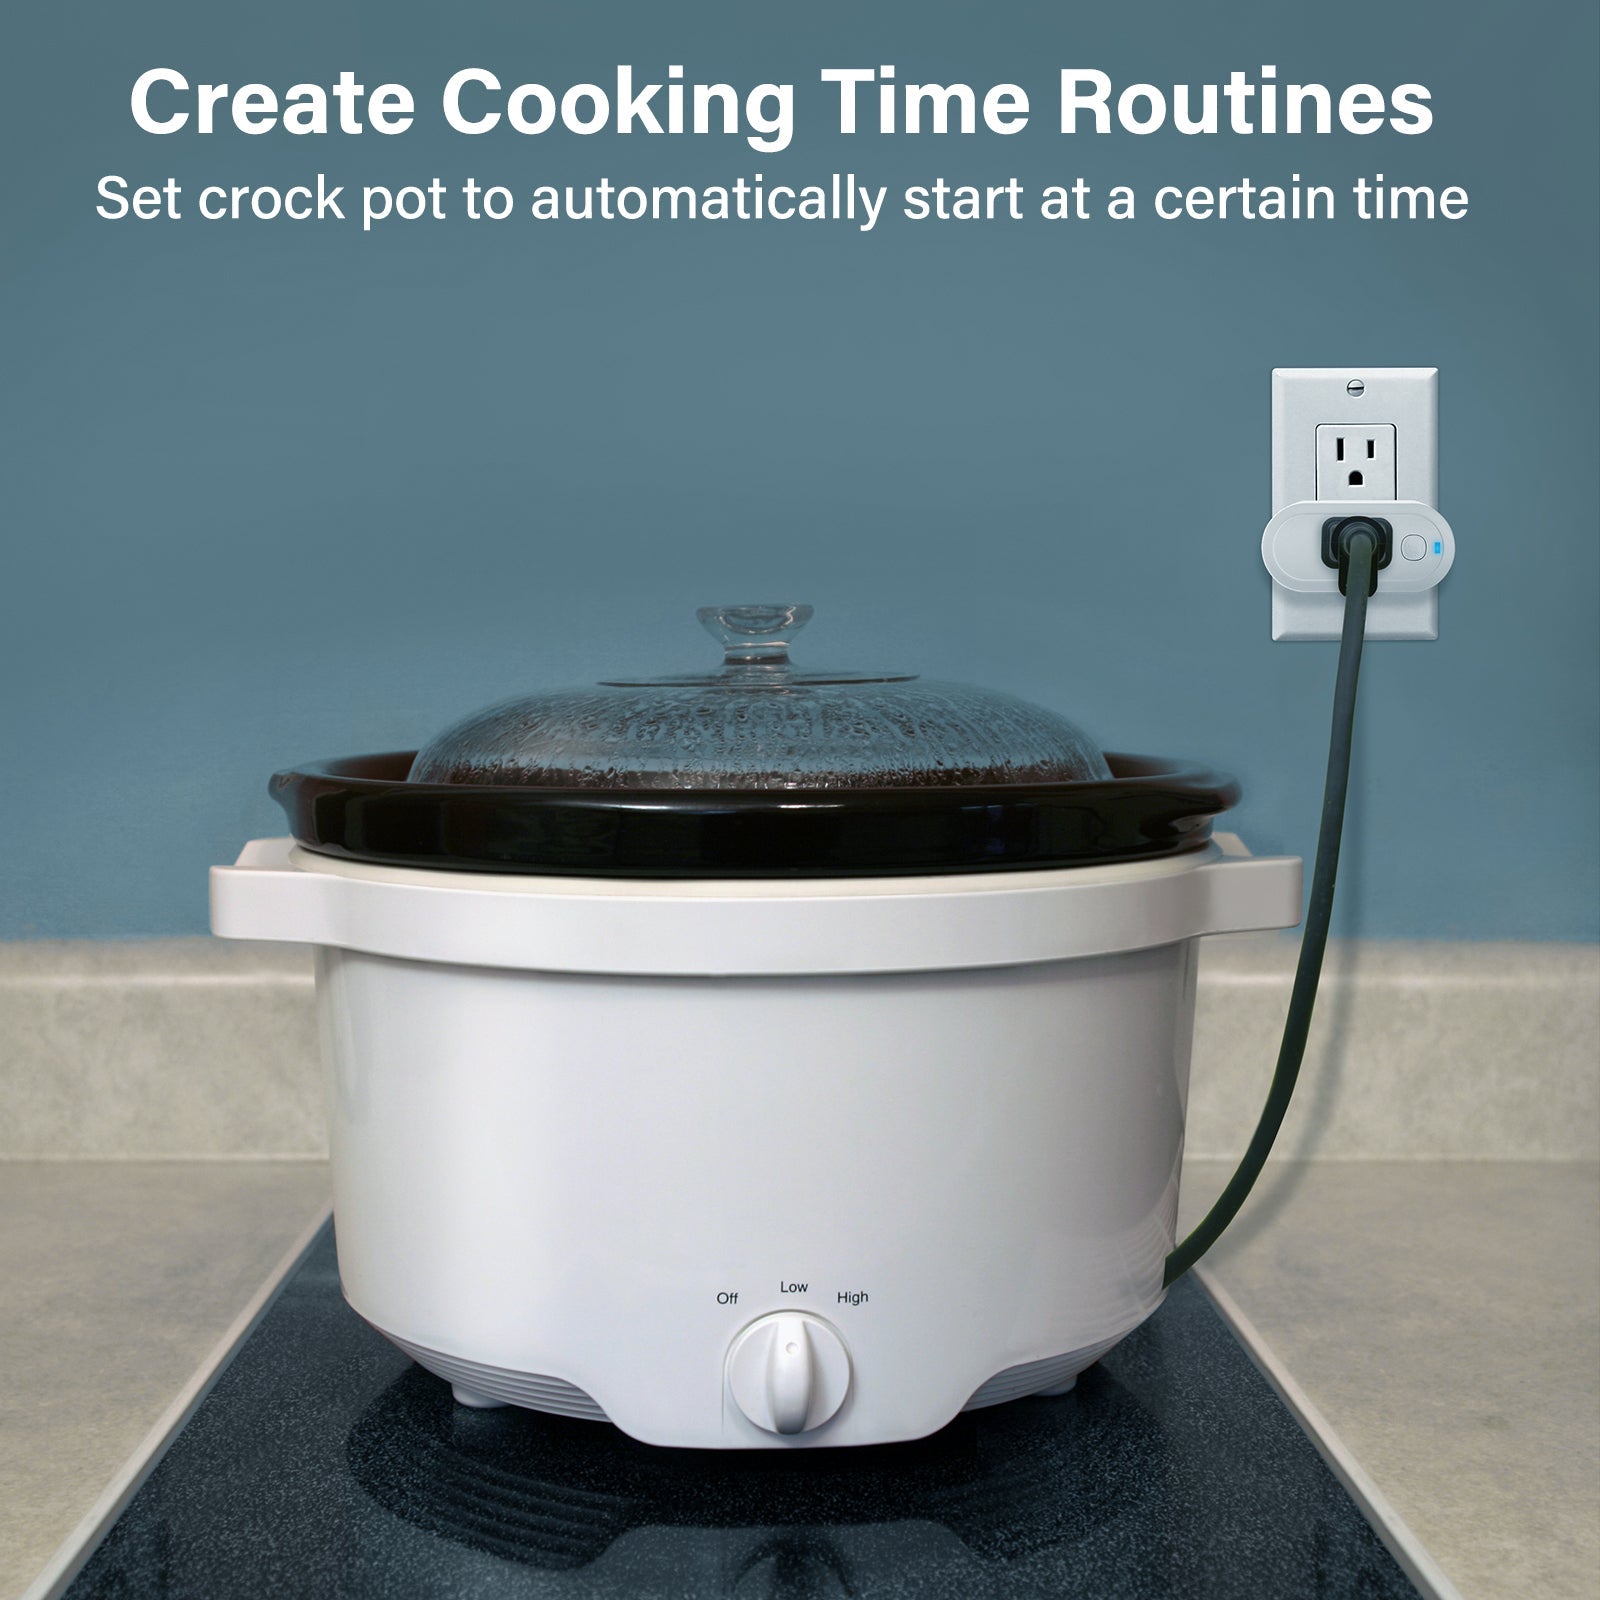 Create Cooking Time Routines: Set up cooking time routines with the Sengled Smart Plug, enabling your crockpot or other cooking appliances to start automatically at a specific time, making meal preparation more convenient.